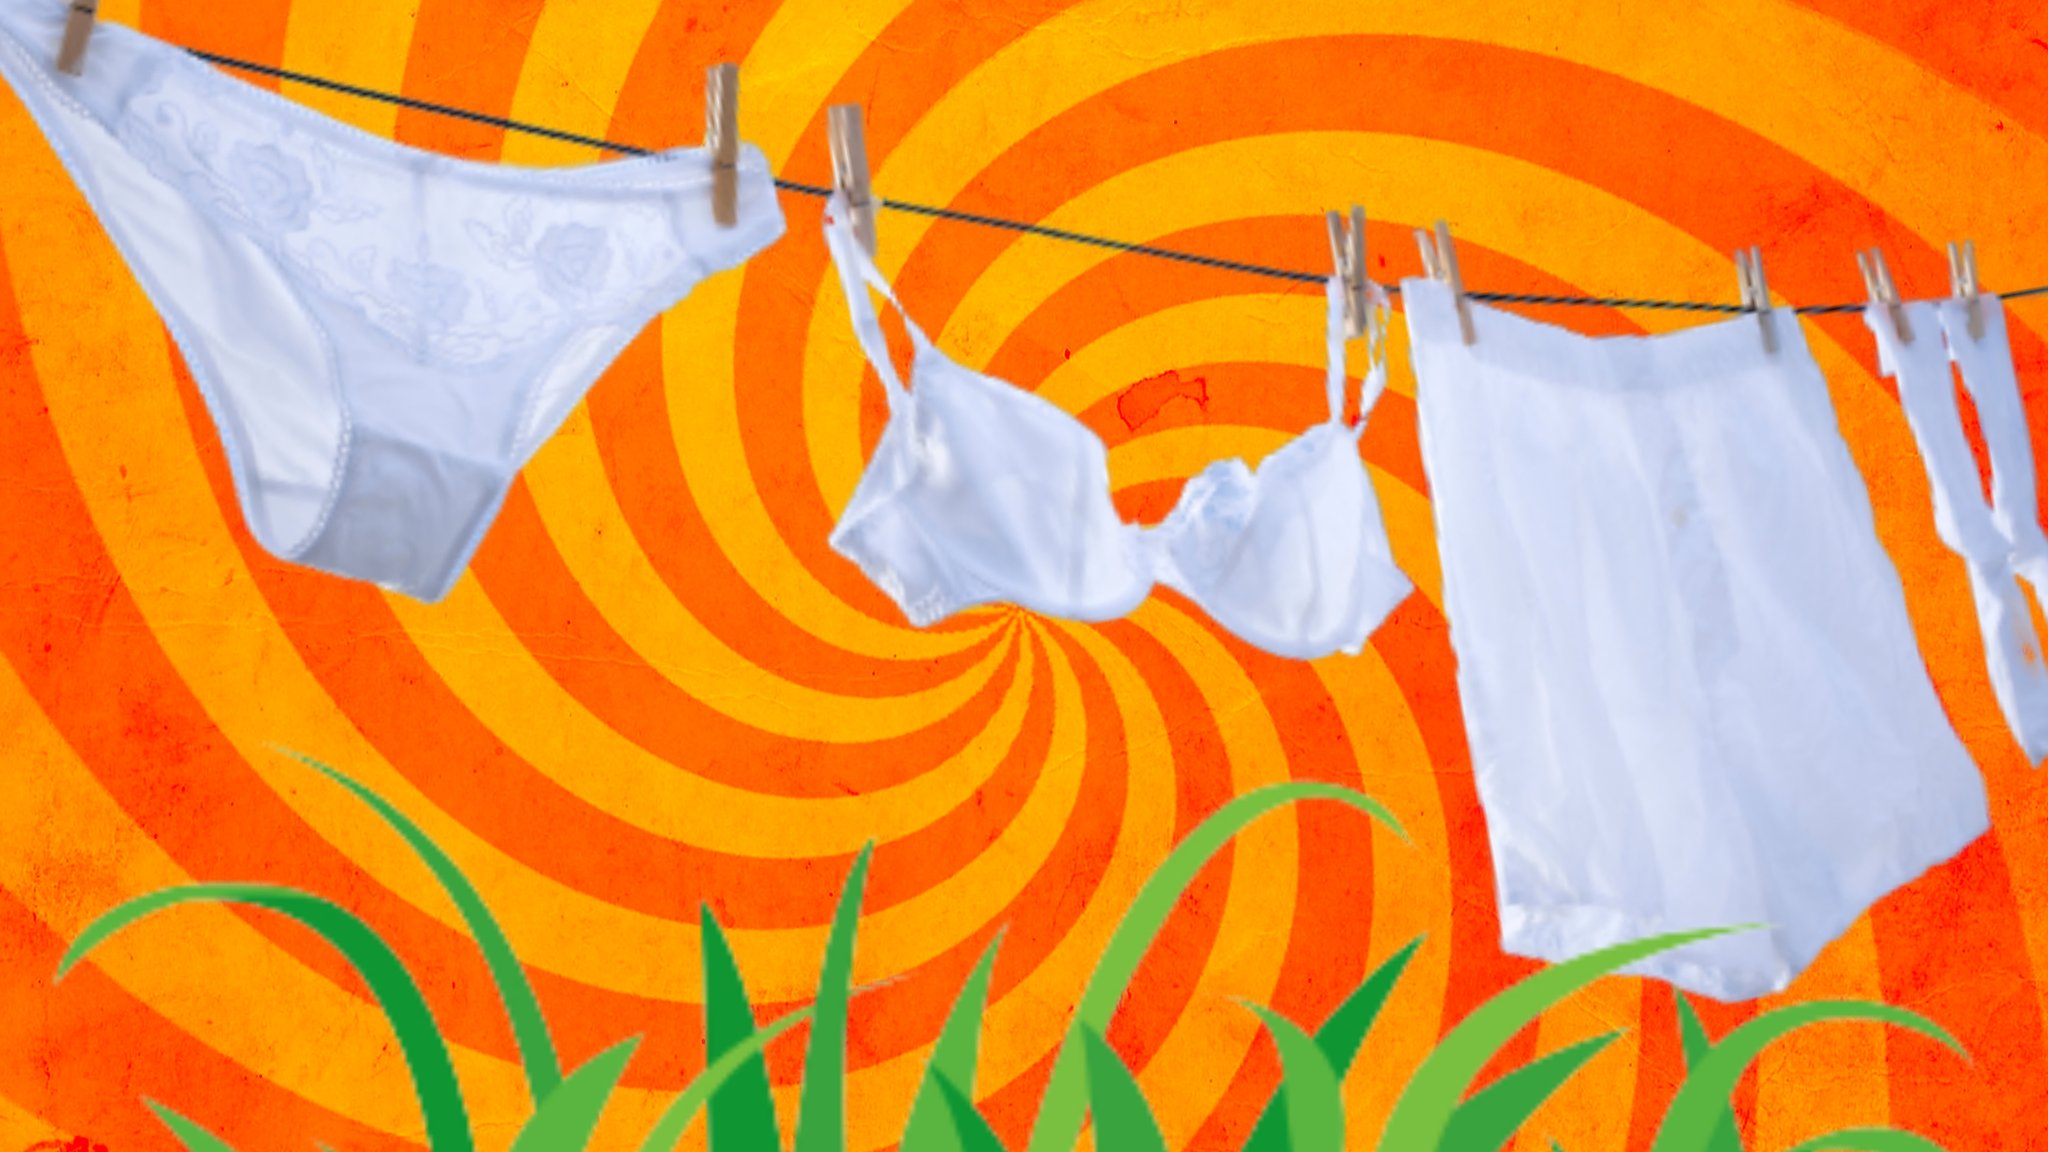 Scientists buried white underwear for testing of soil